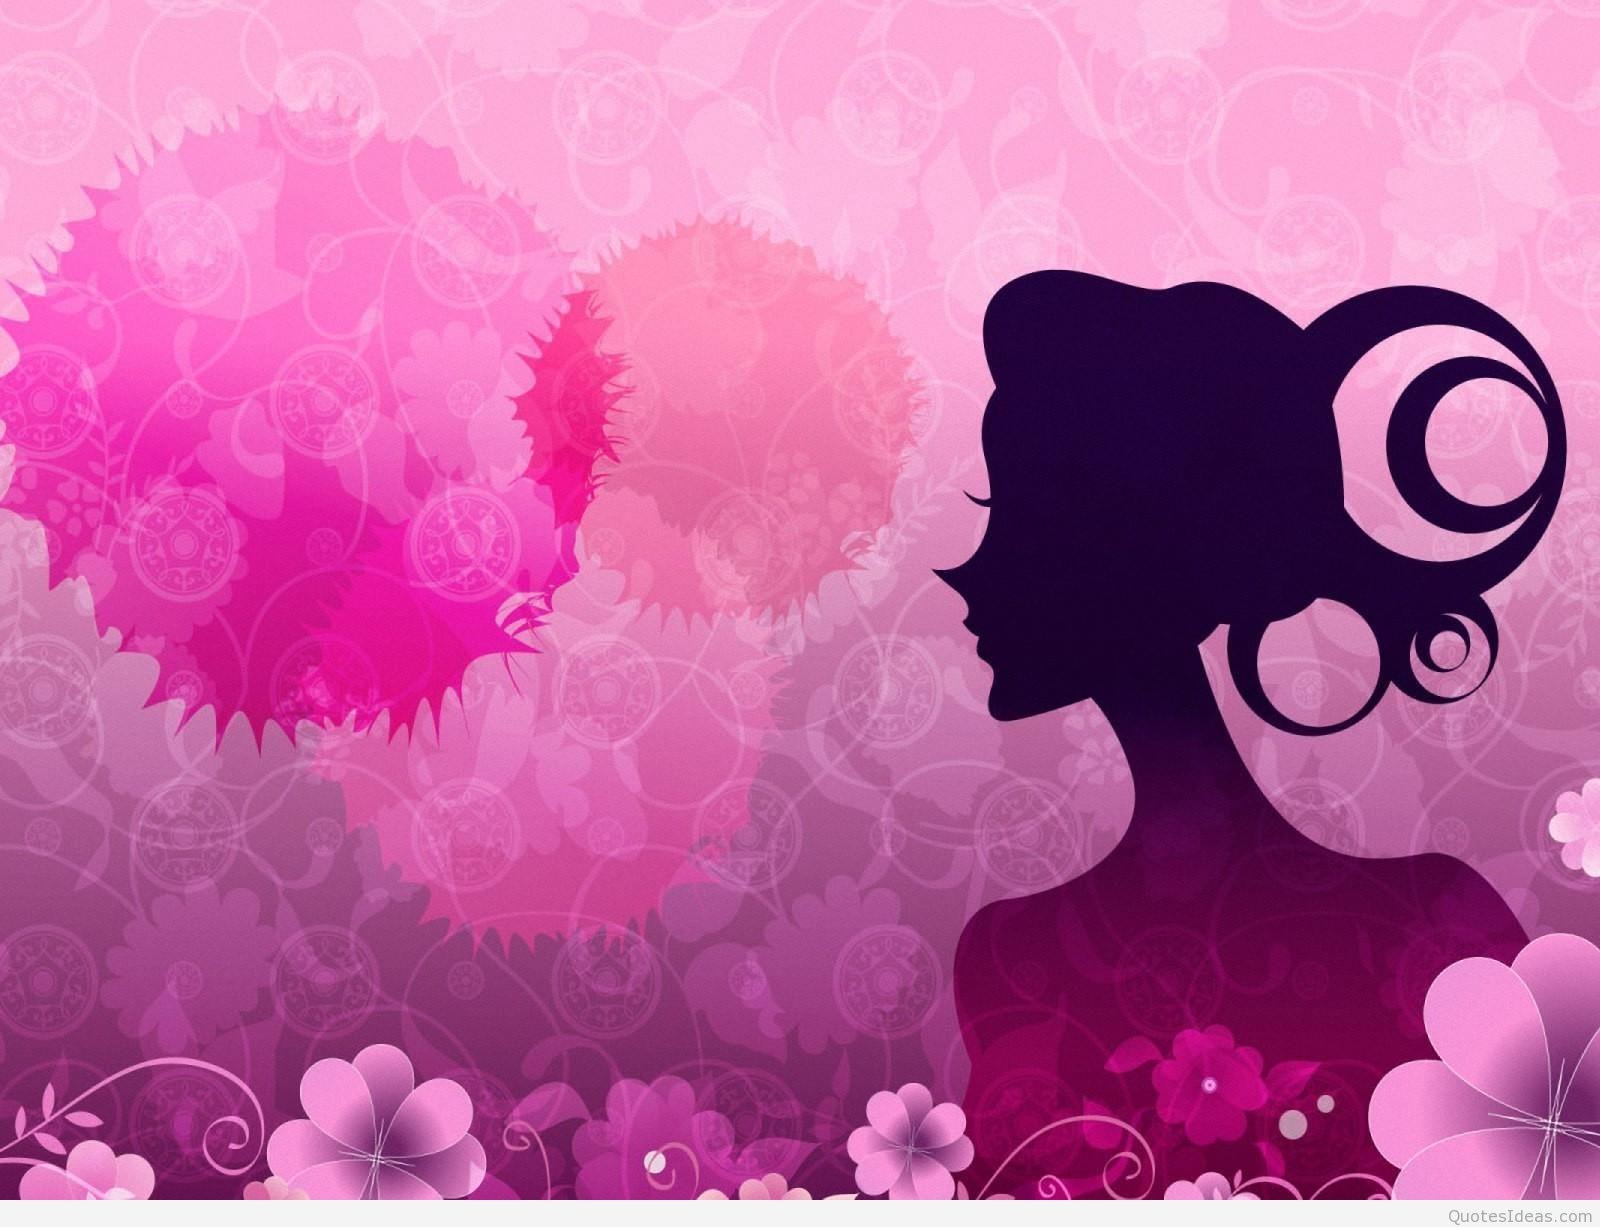 Happy international women’s day march wallpapers quotes